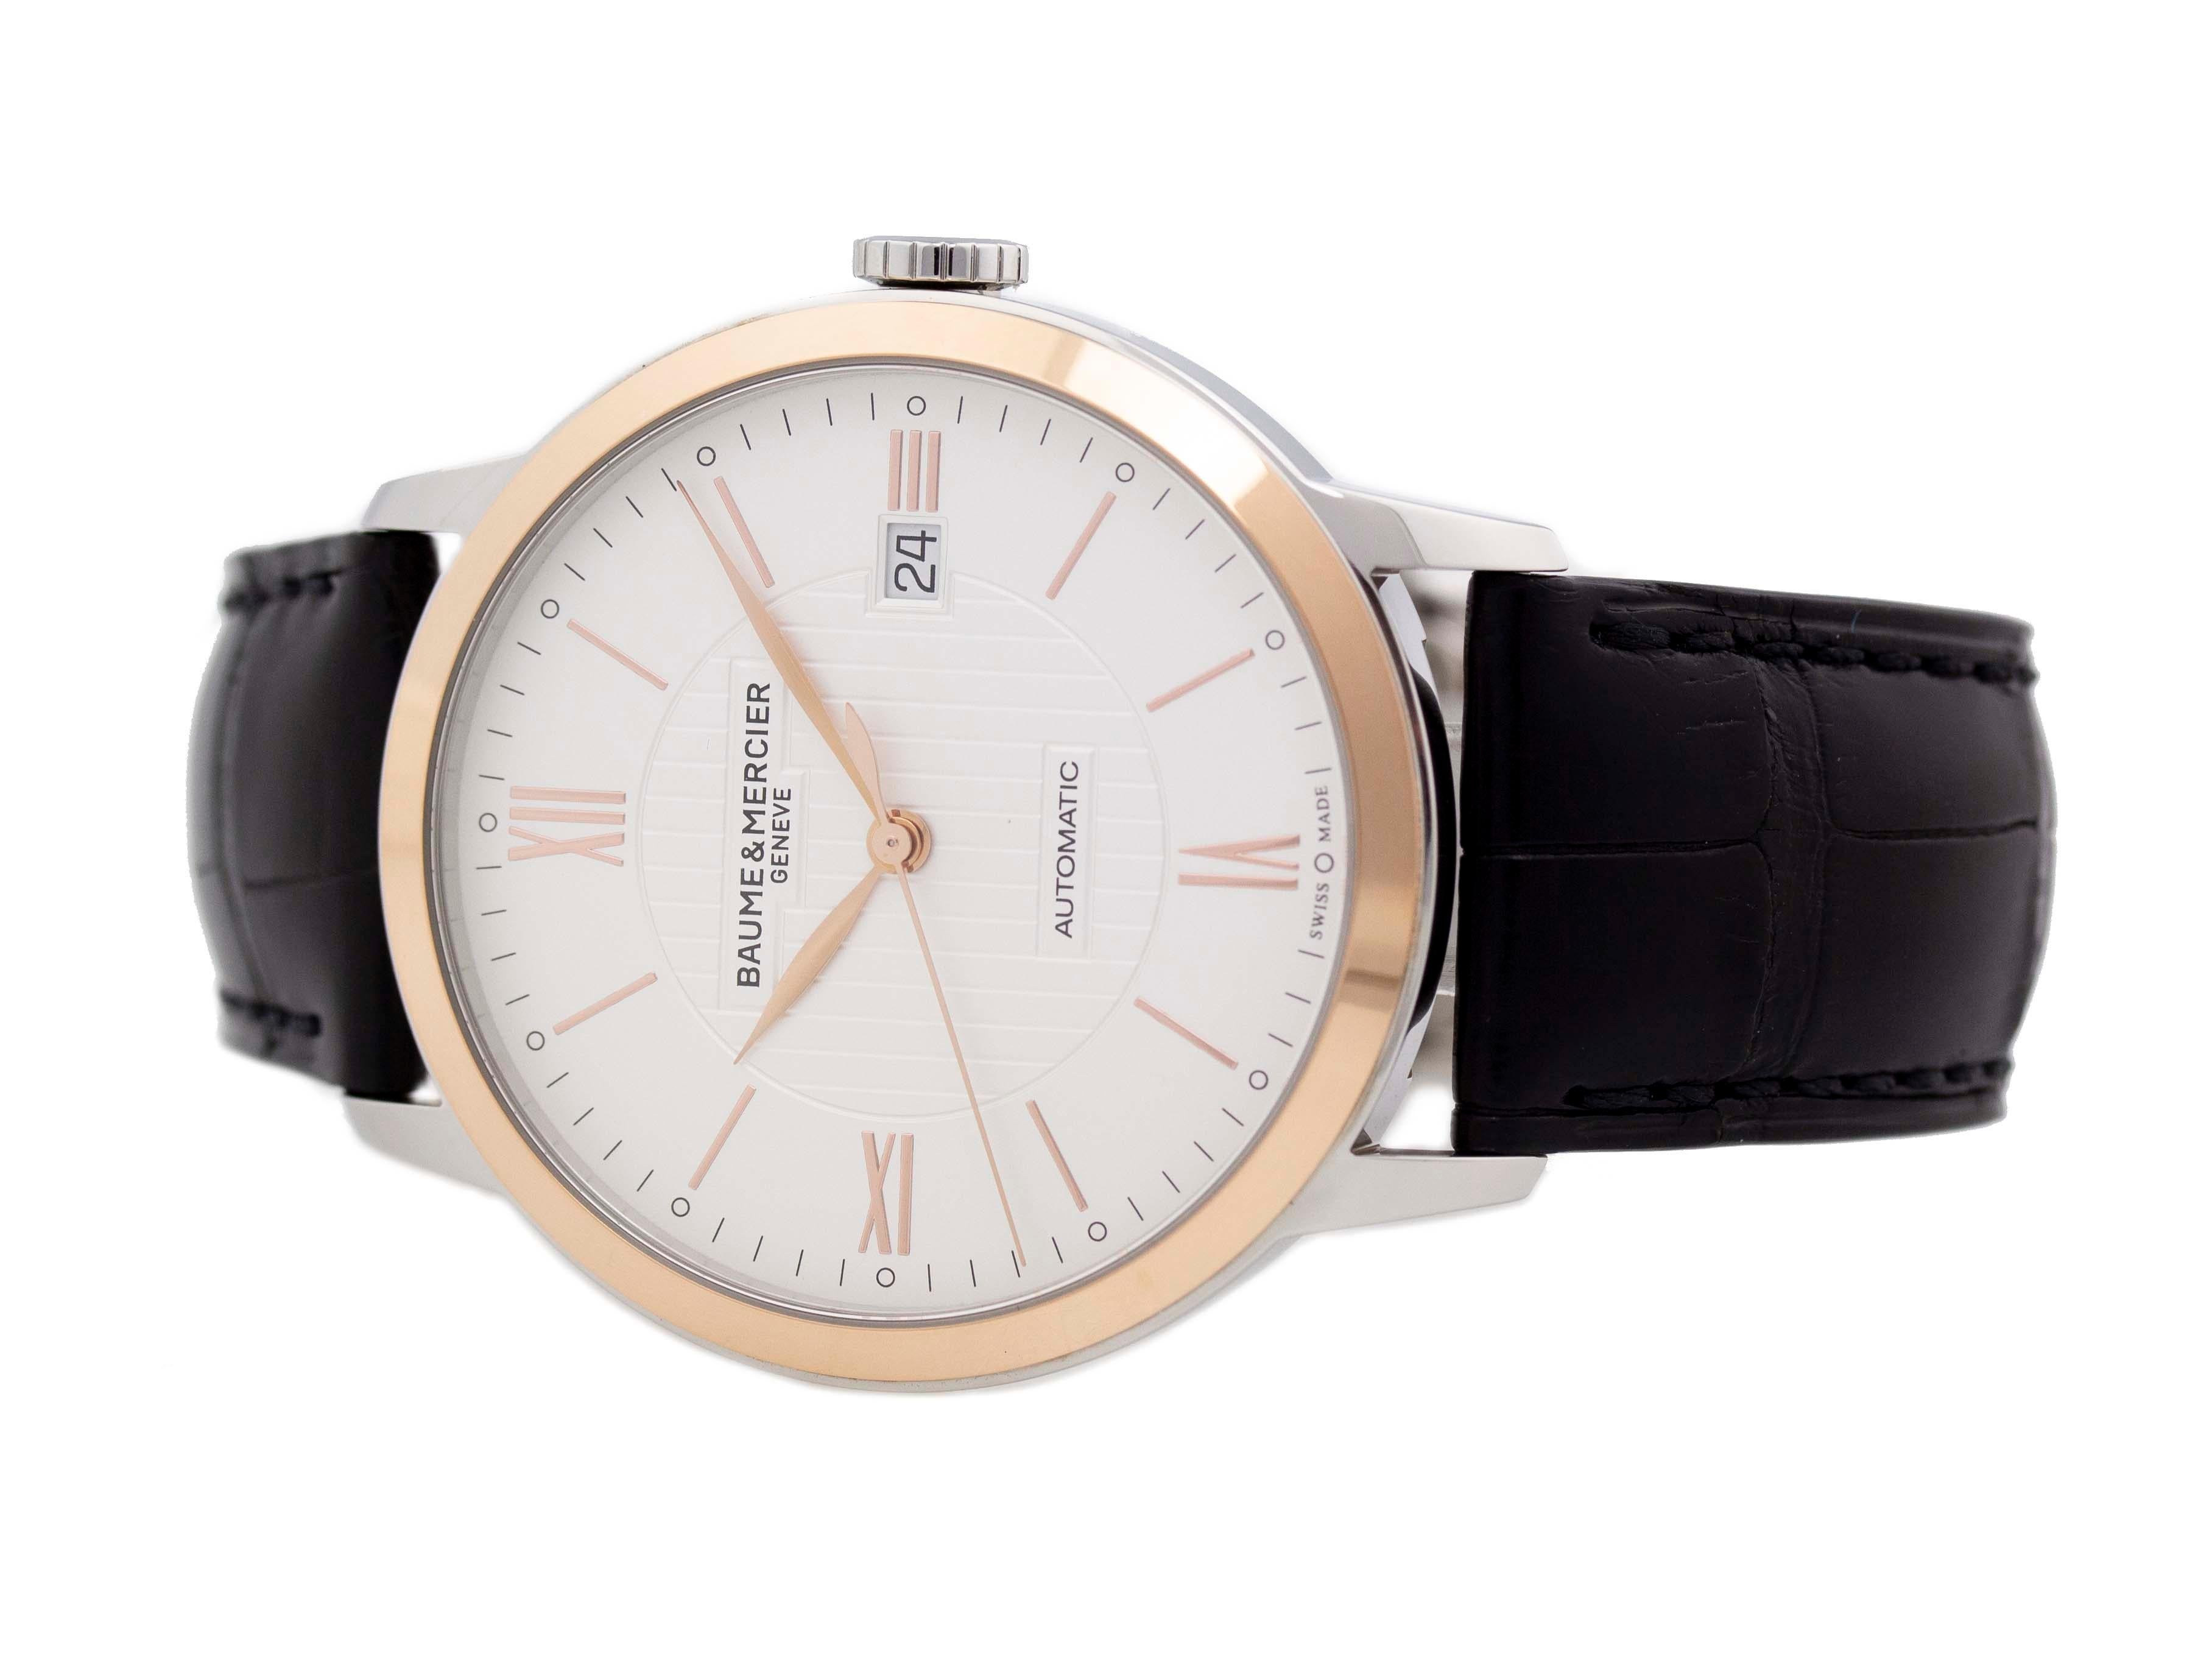 Baume & Mercier Classima M0A10216 In Excellent Condition For Sale In Willow Grove, PA